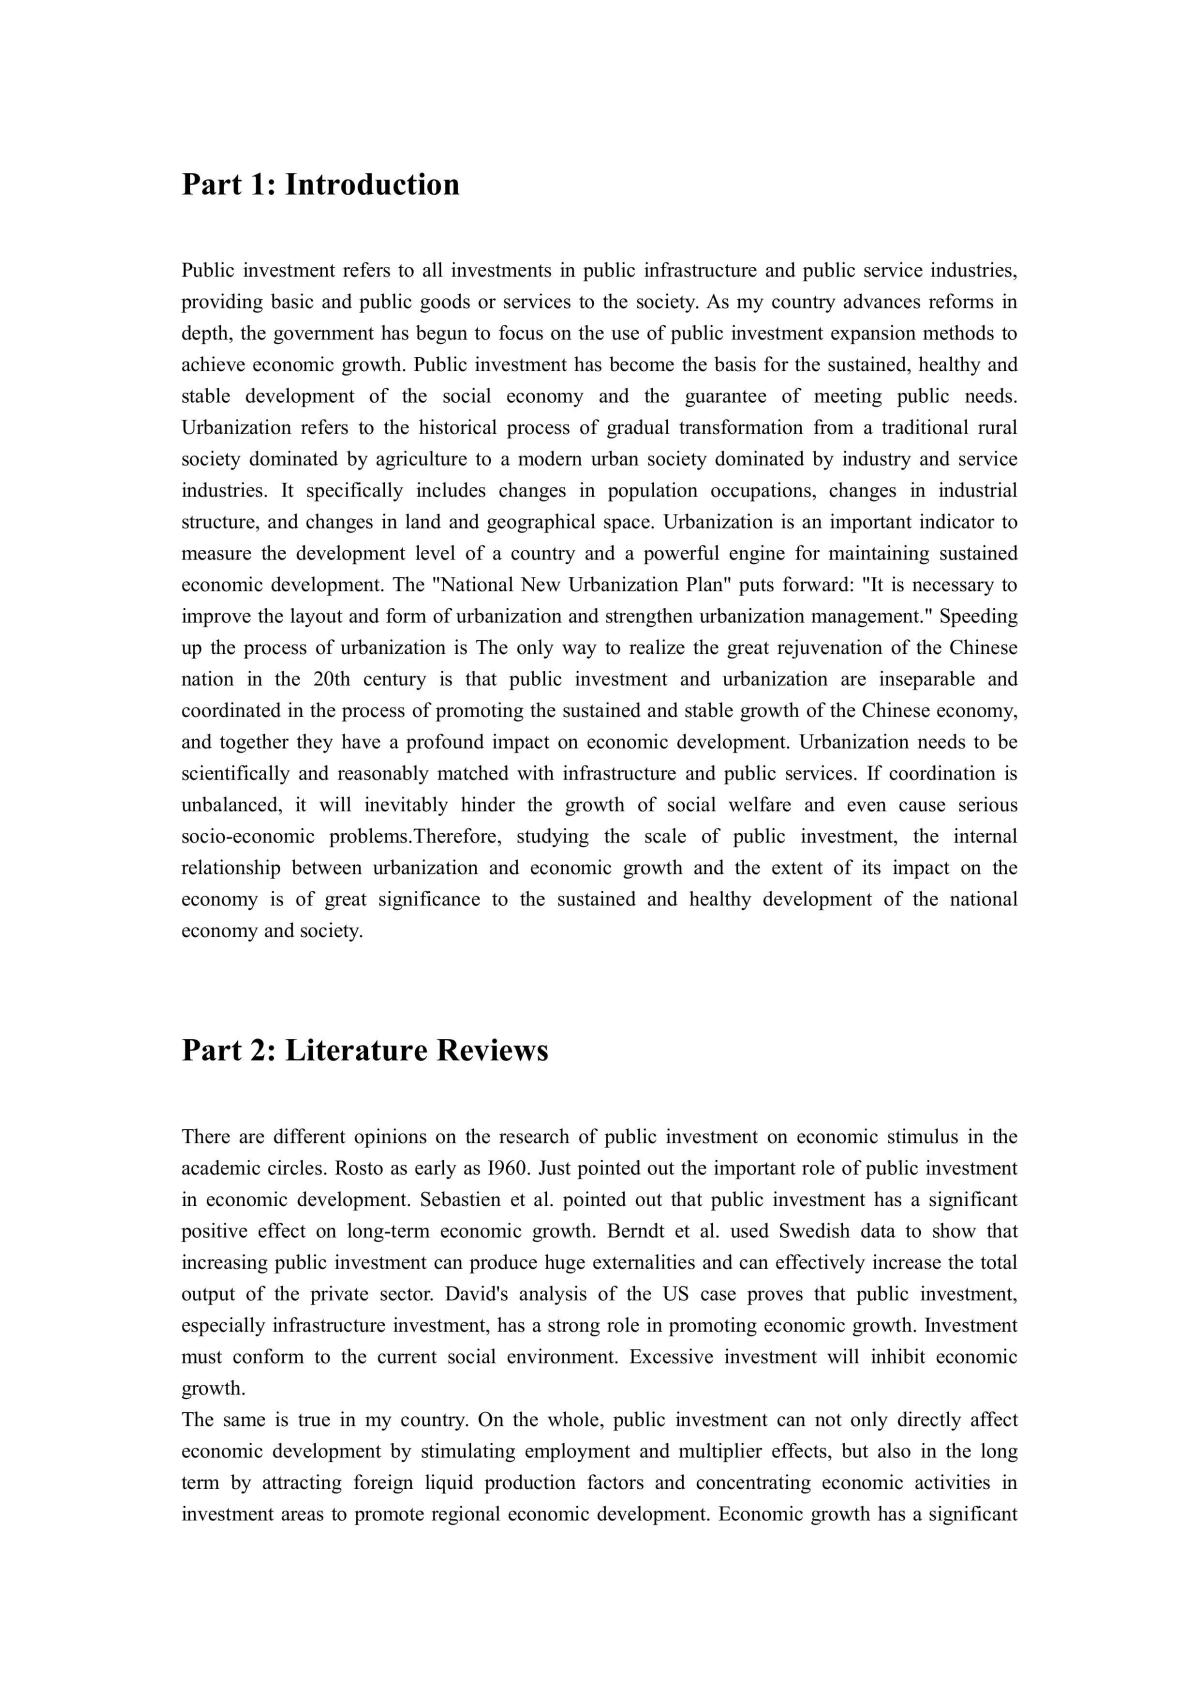  Empirical Analysis of the Impact of Public Investment and Urbanization on Economic Development - Page 3